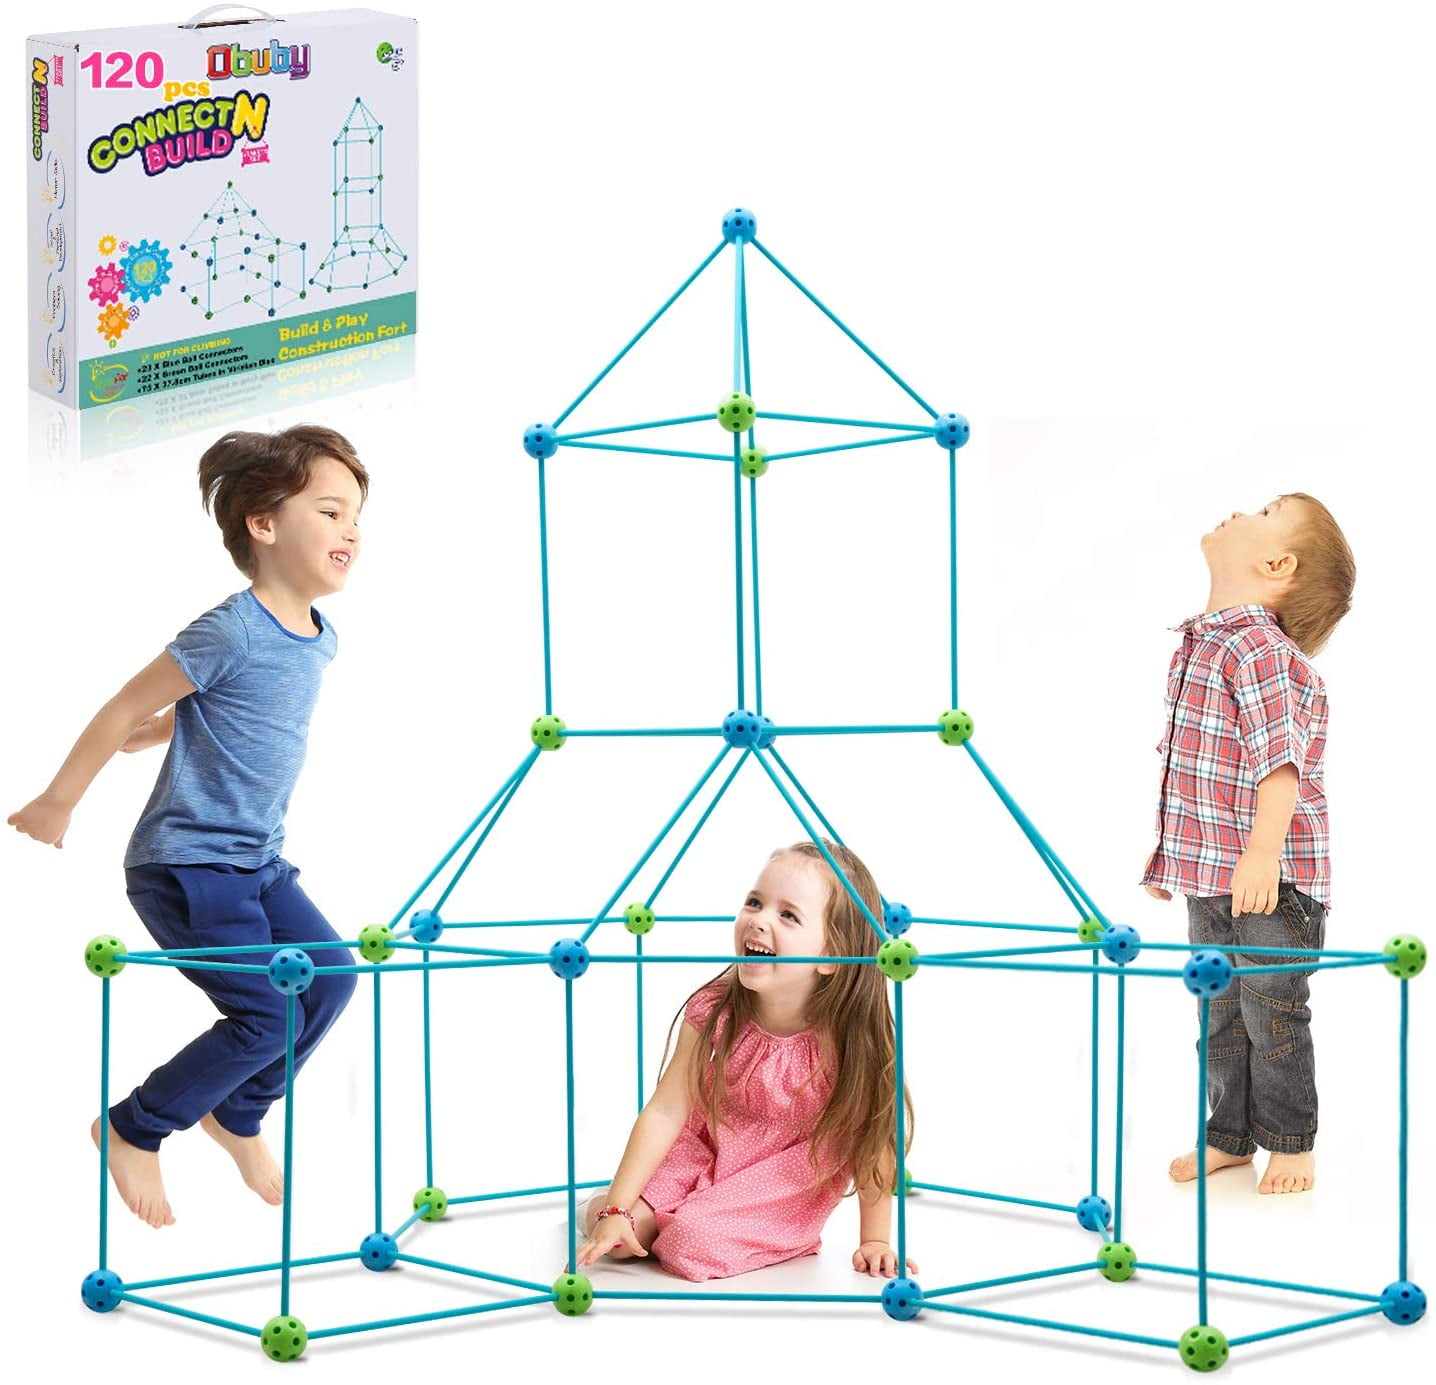 Limei International STEM DIY Play Fort Building Kit Fun Construction Fort Builder Large Making Tent Indoor Magic Toys for Kids with Balls and Poles 75pcs 